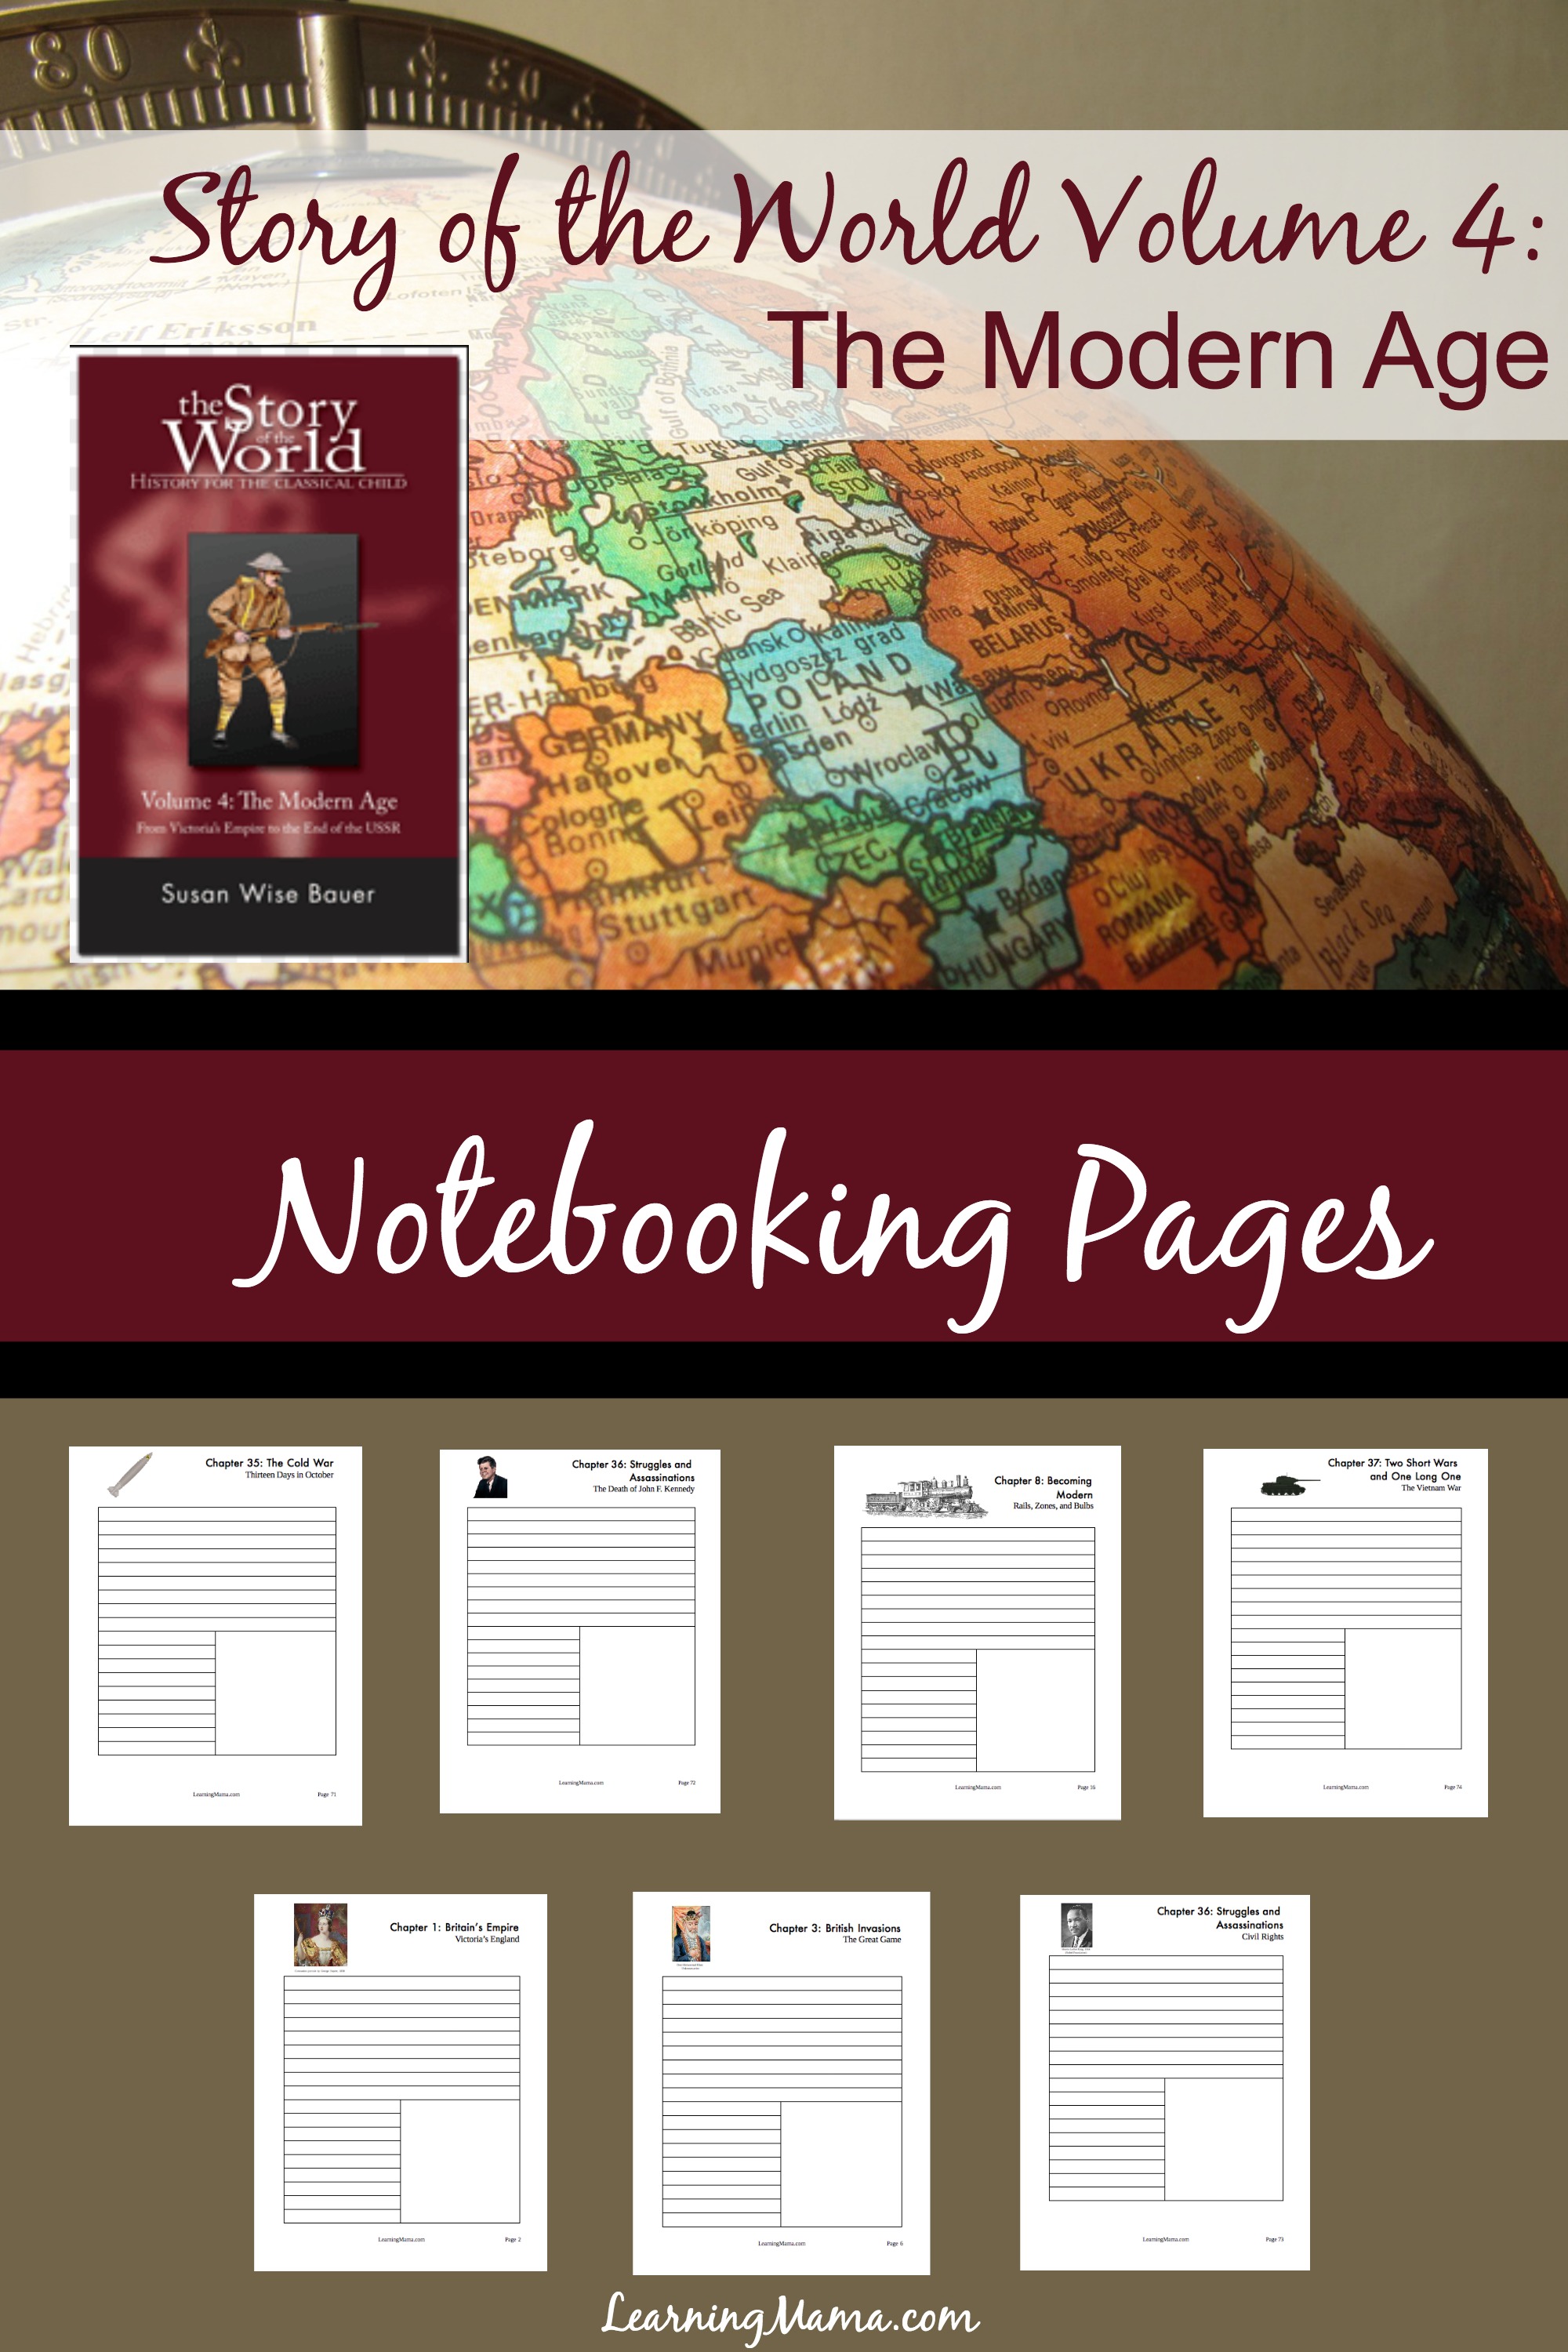 Free, printable, Story of the World Volume 4 Notebooking Pages.